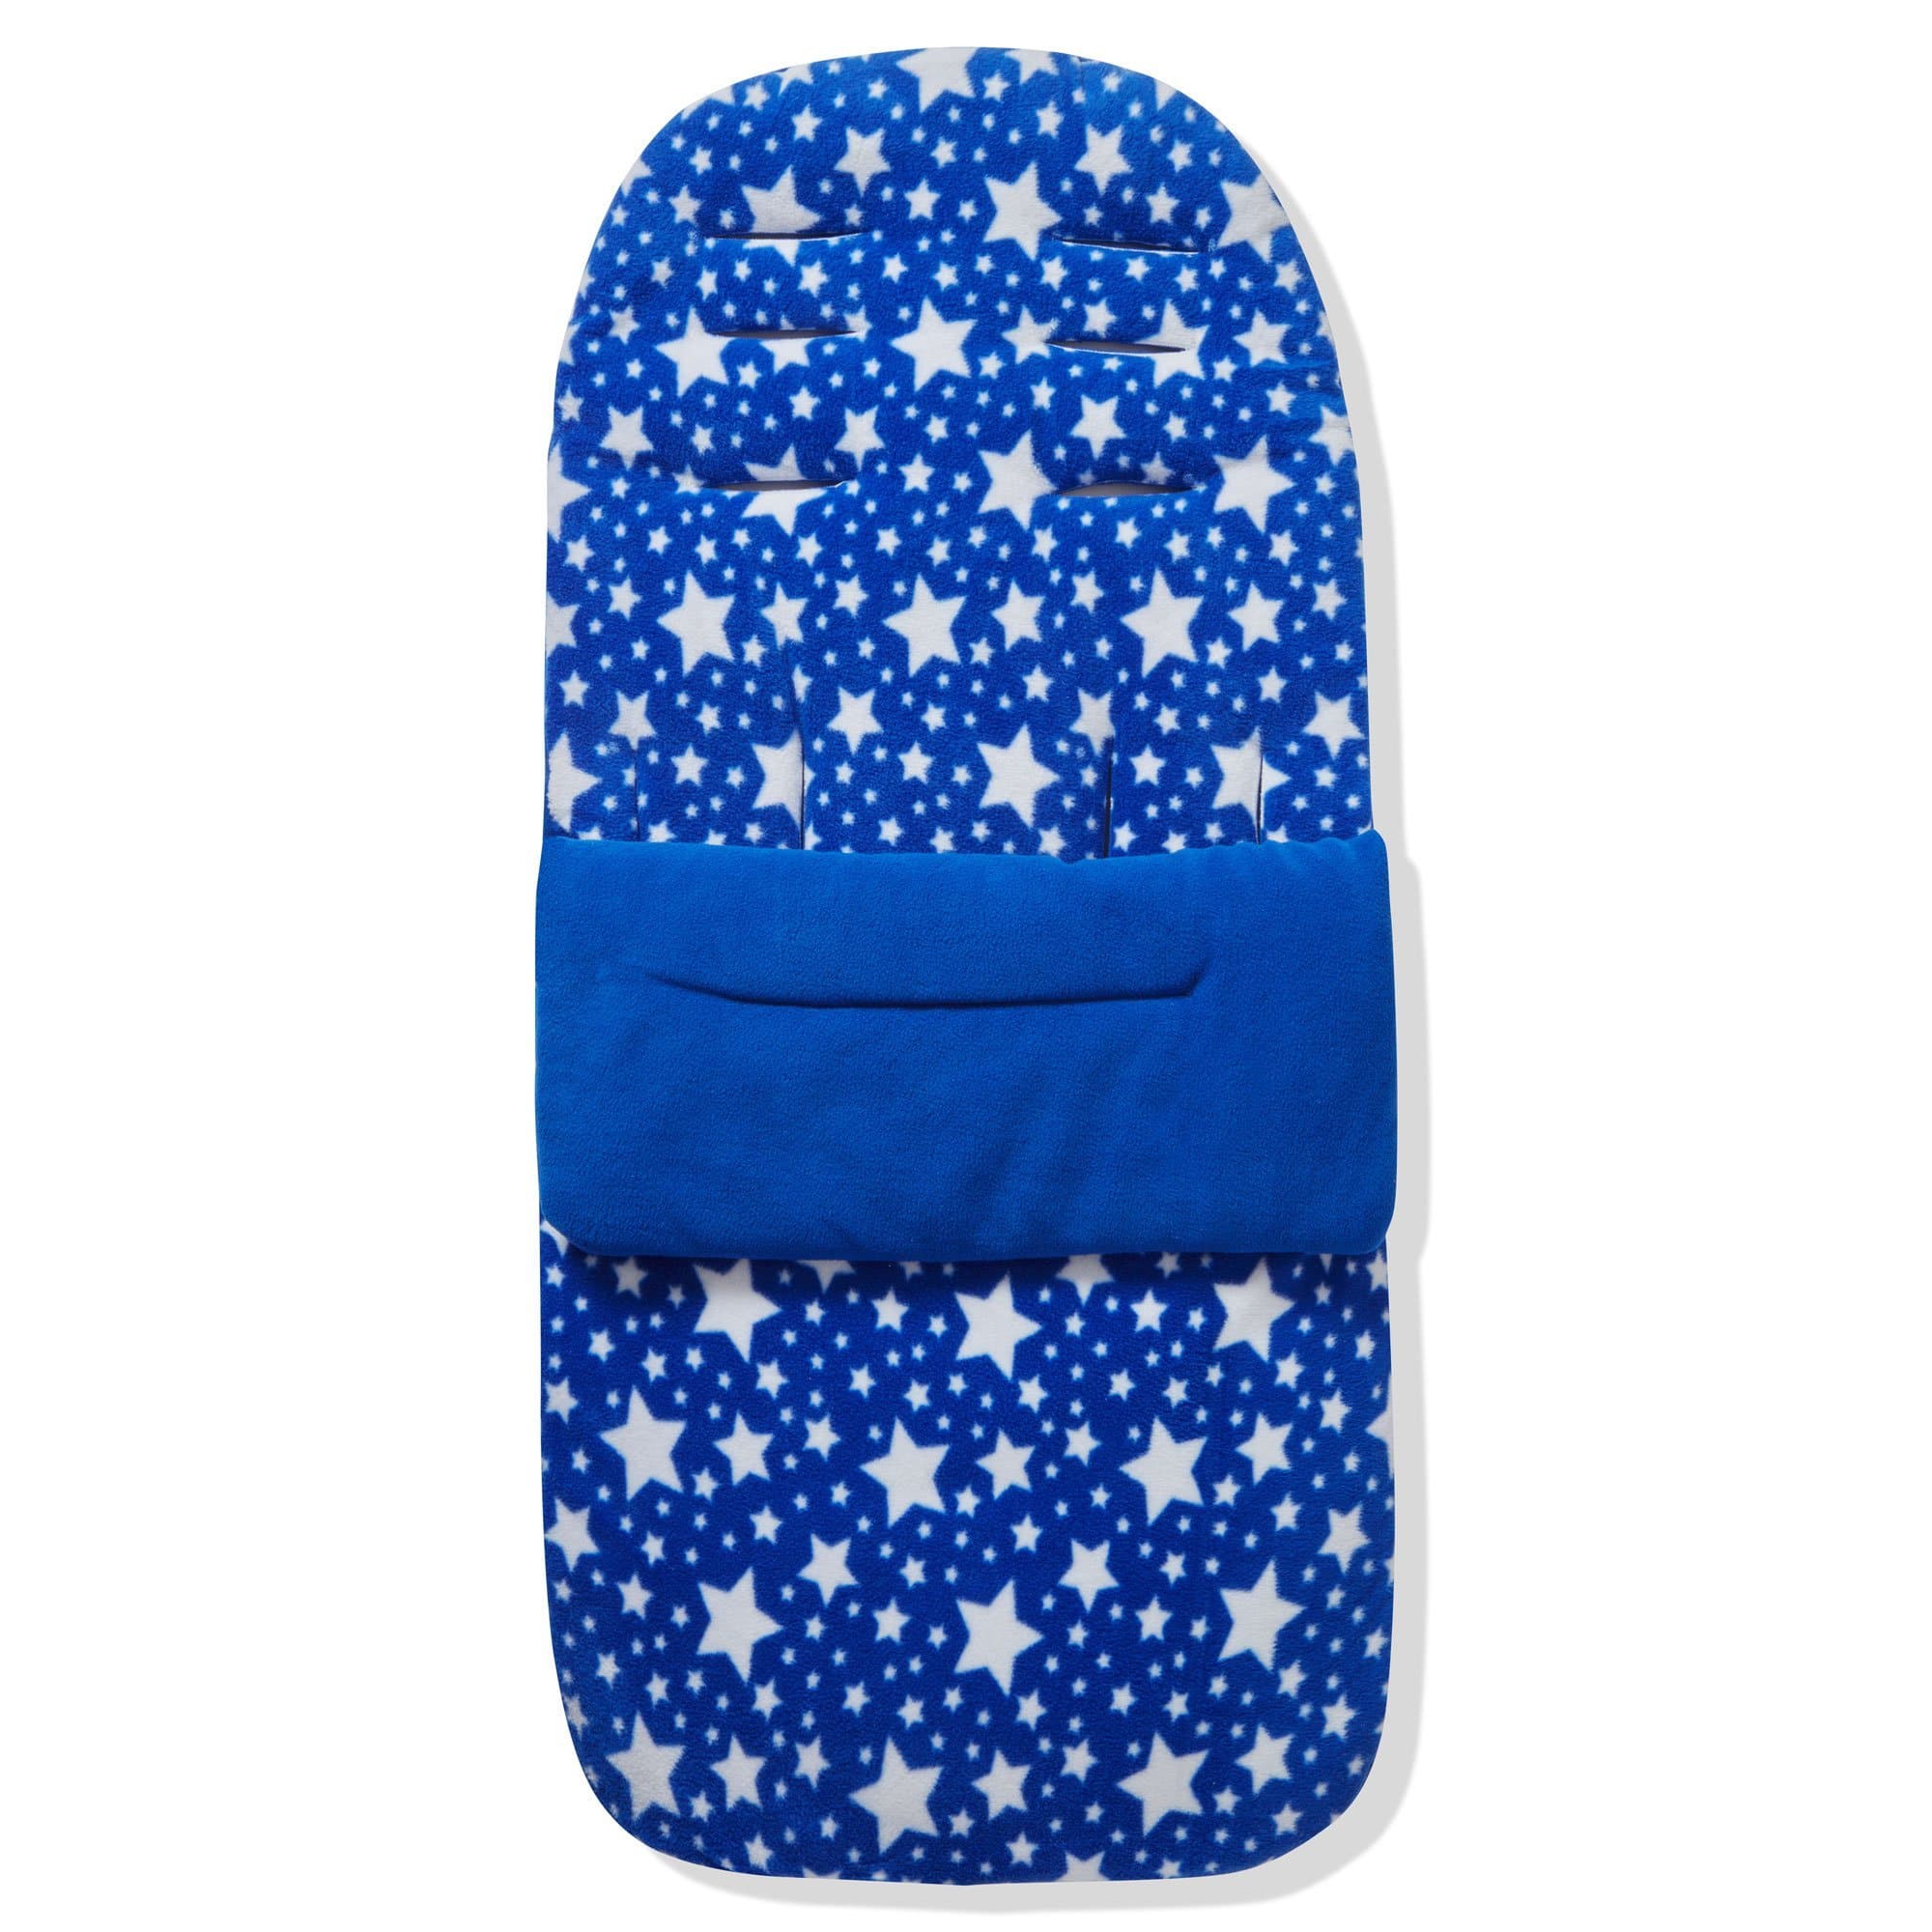 Fleece Footmuff / Cosy Toes Compatible with Jane - Blue Star / Fits All Models | For Your Little One